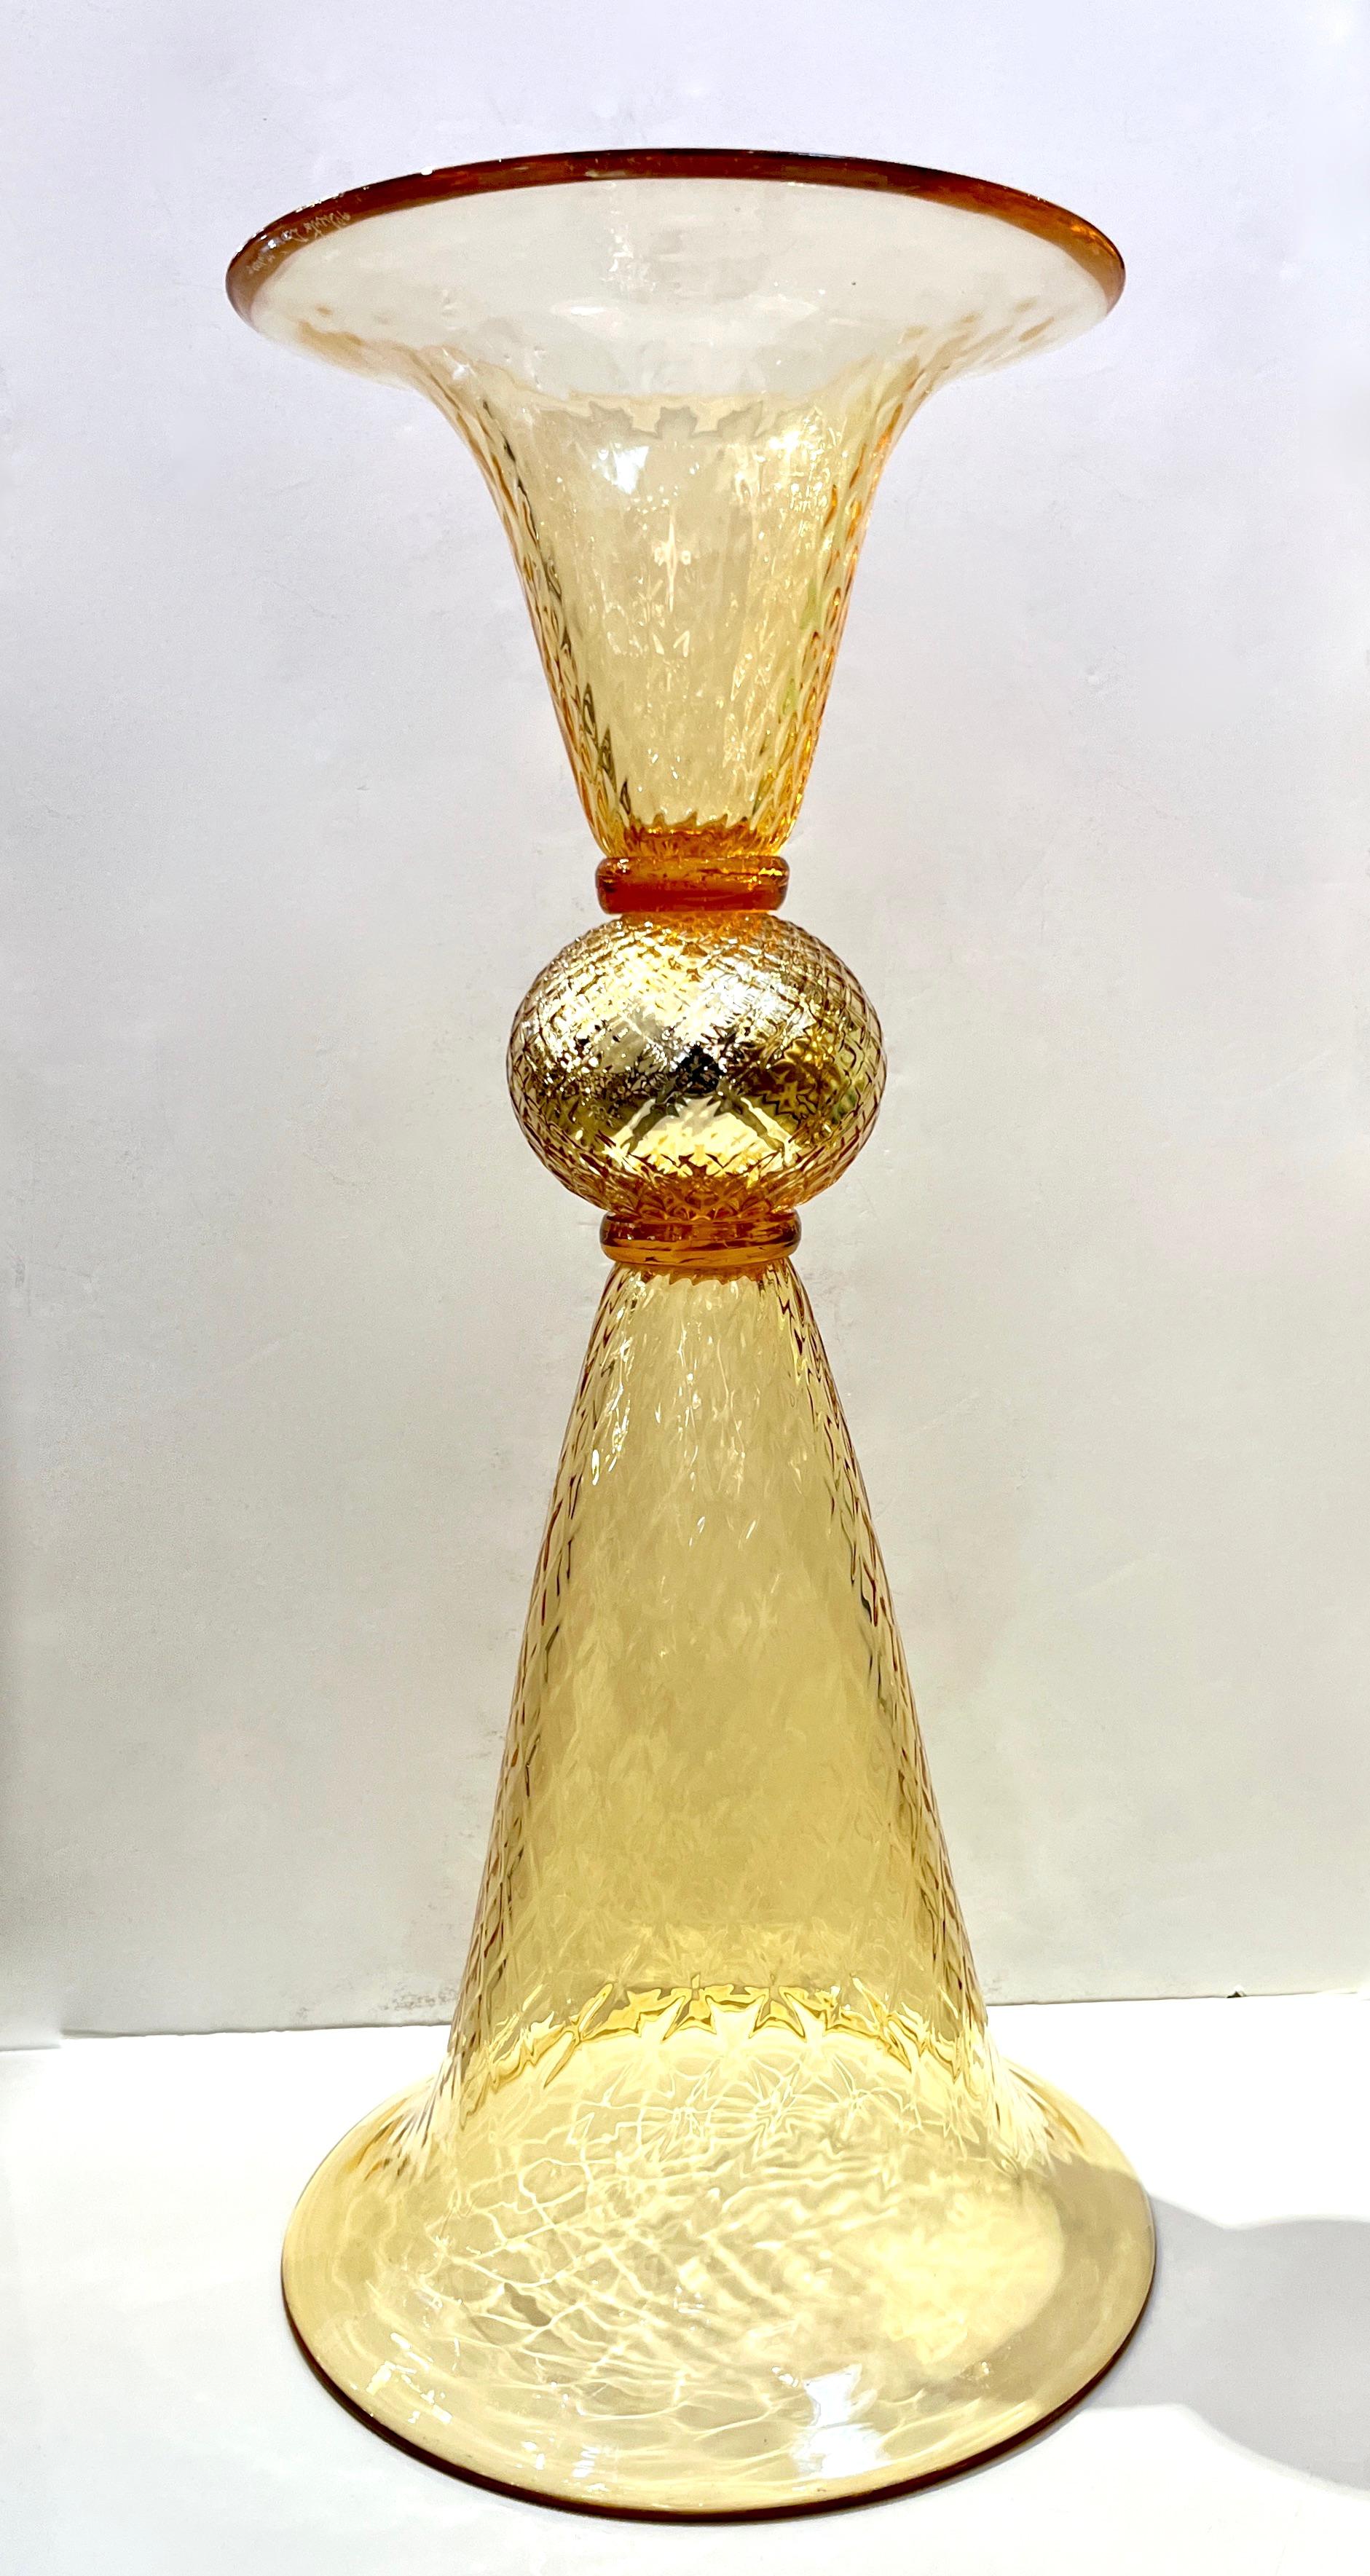 Contemporary Venetian Decorative Arts gold vase, in blown Murano glass, worked with pure 24k gold, one part more elongated than the other and both can function as a base. The bodies are both in textured glass with a honeycomb pattern that multiplies